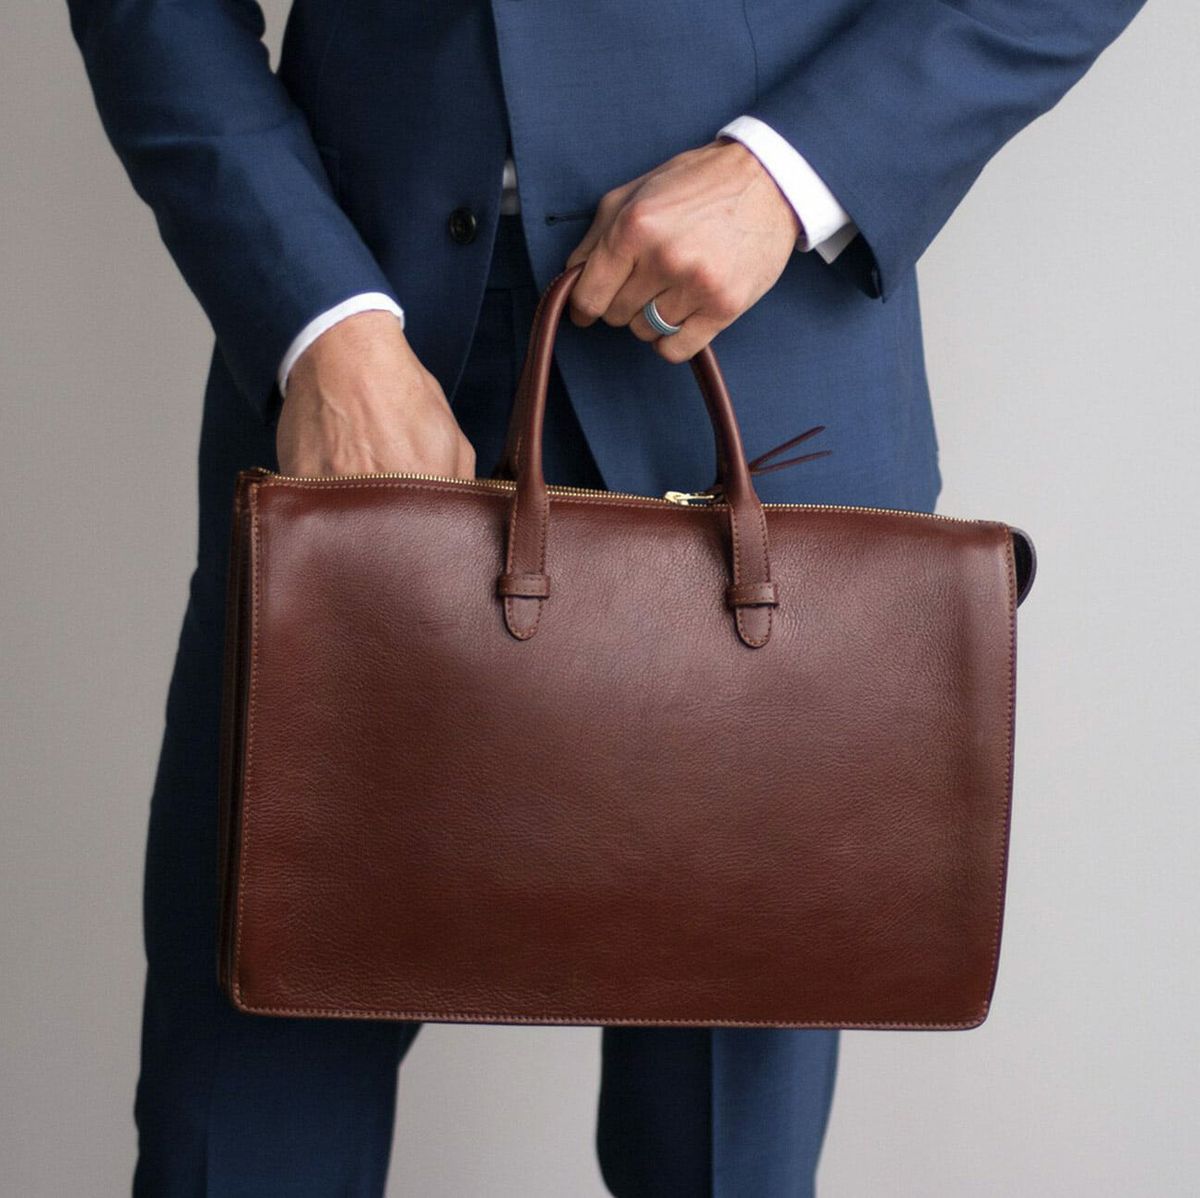 20 Best Leather Laptop Bags of 2022